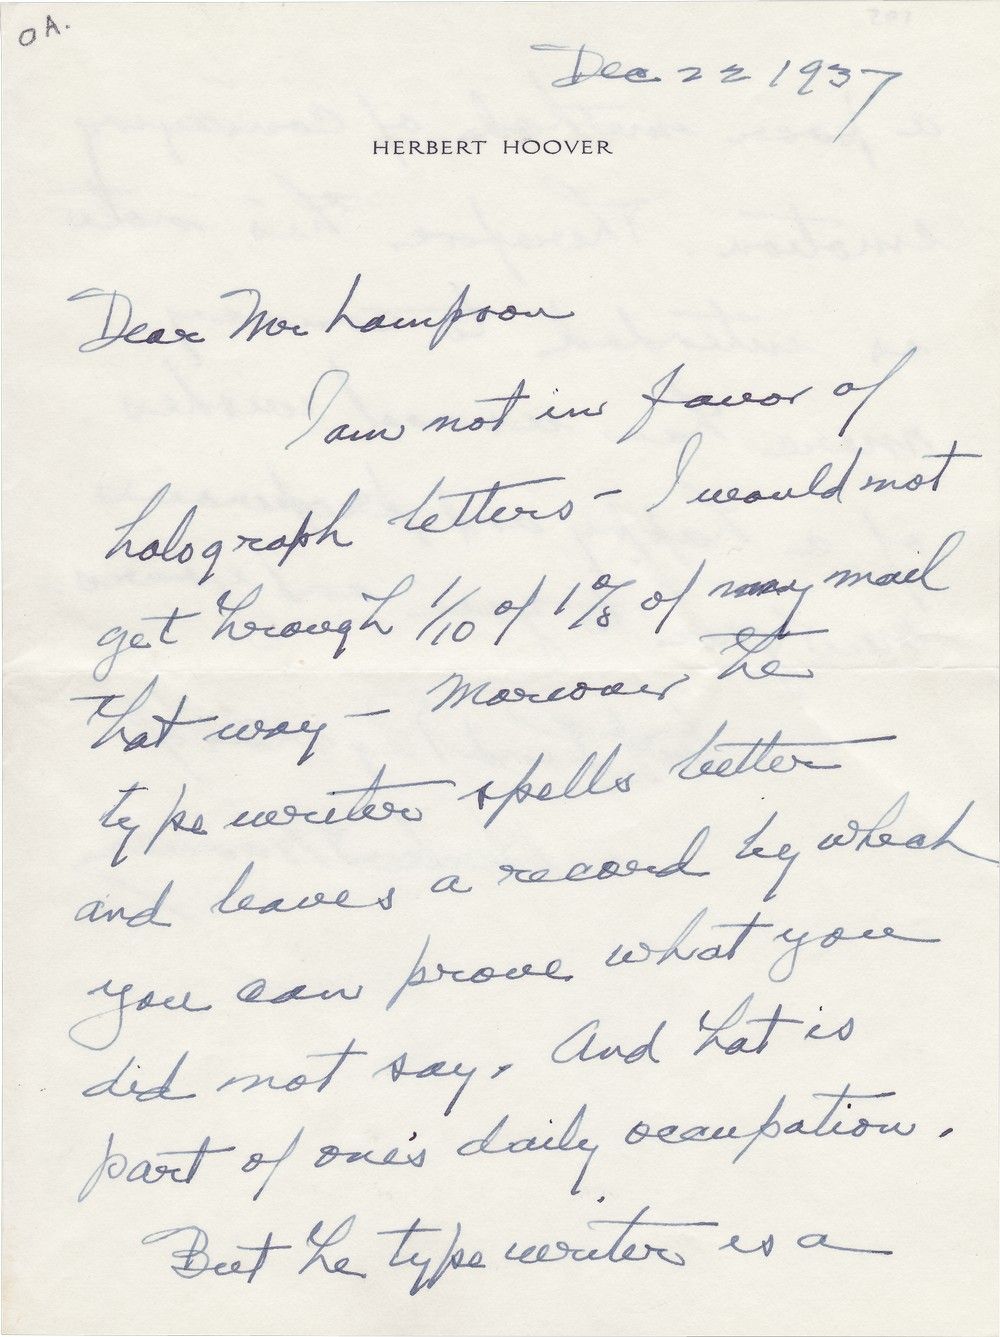 Herbert Hoover Explains, In Autograph, His Antipathy to Writing Holograph Letters